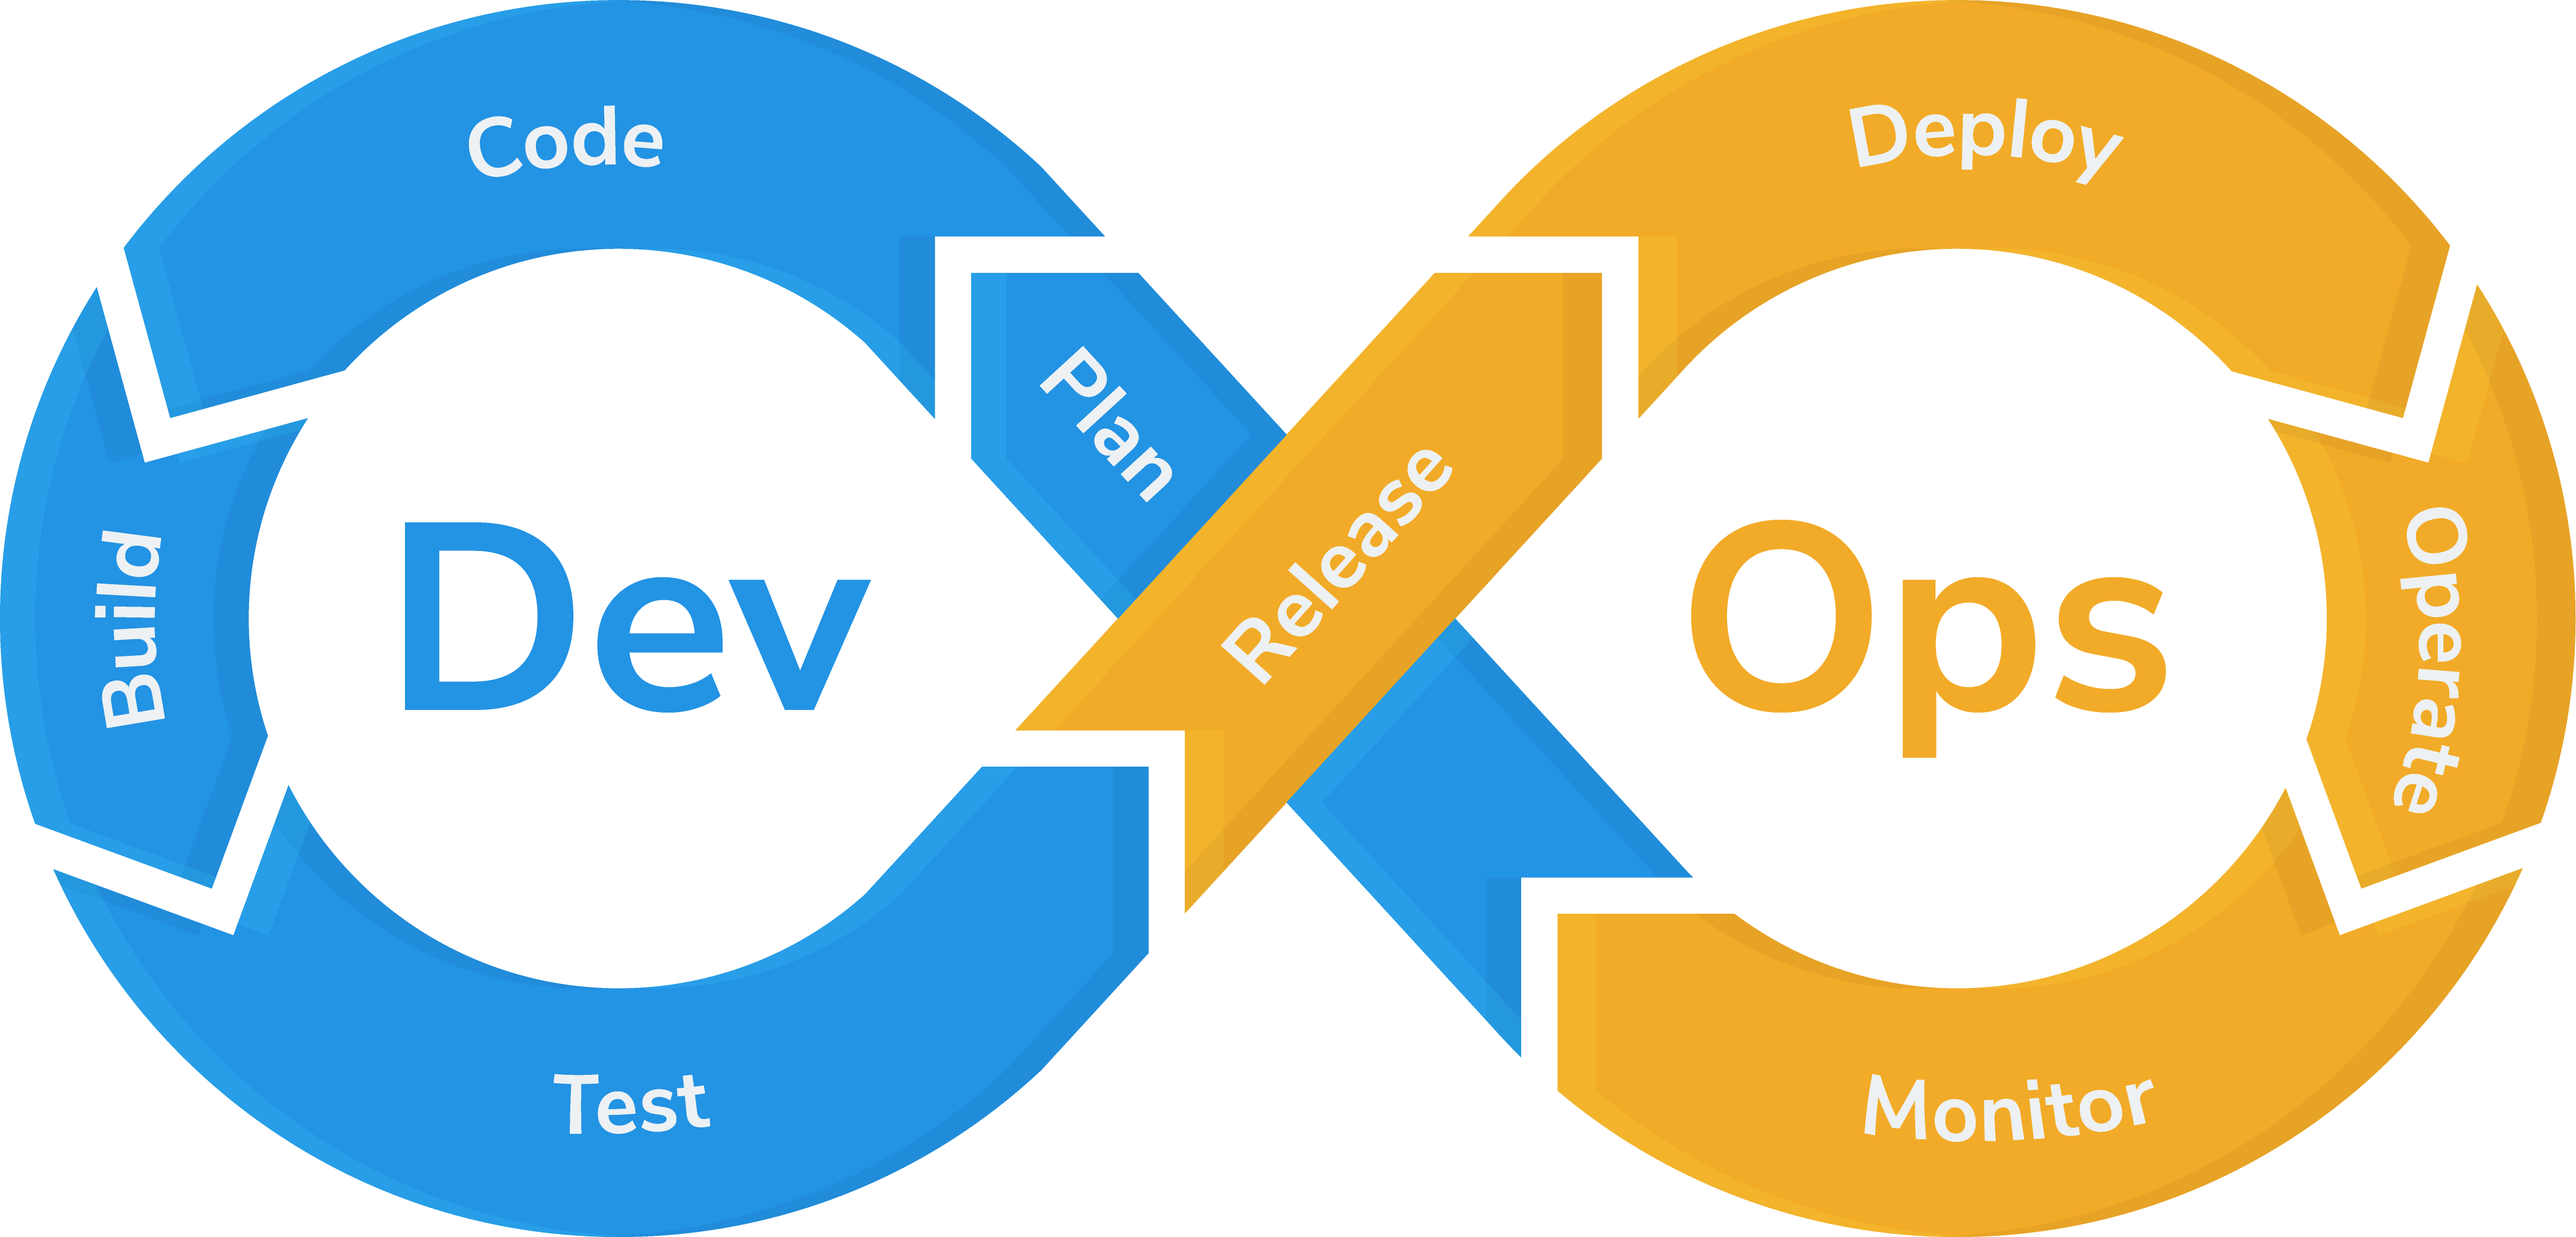 Go and DevOps